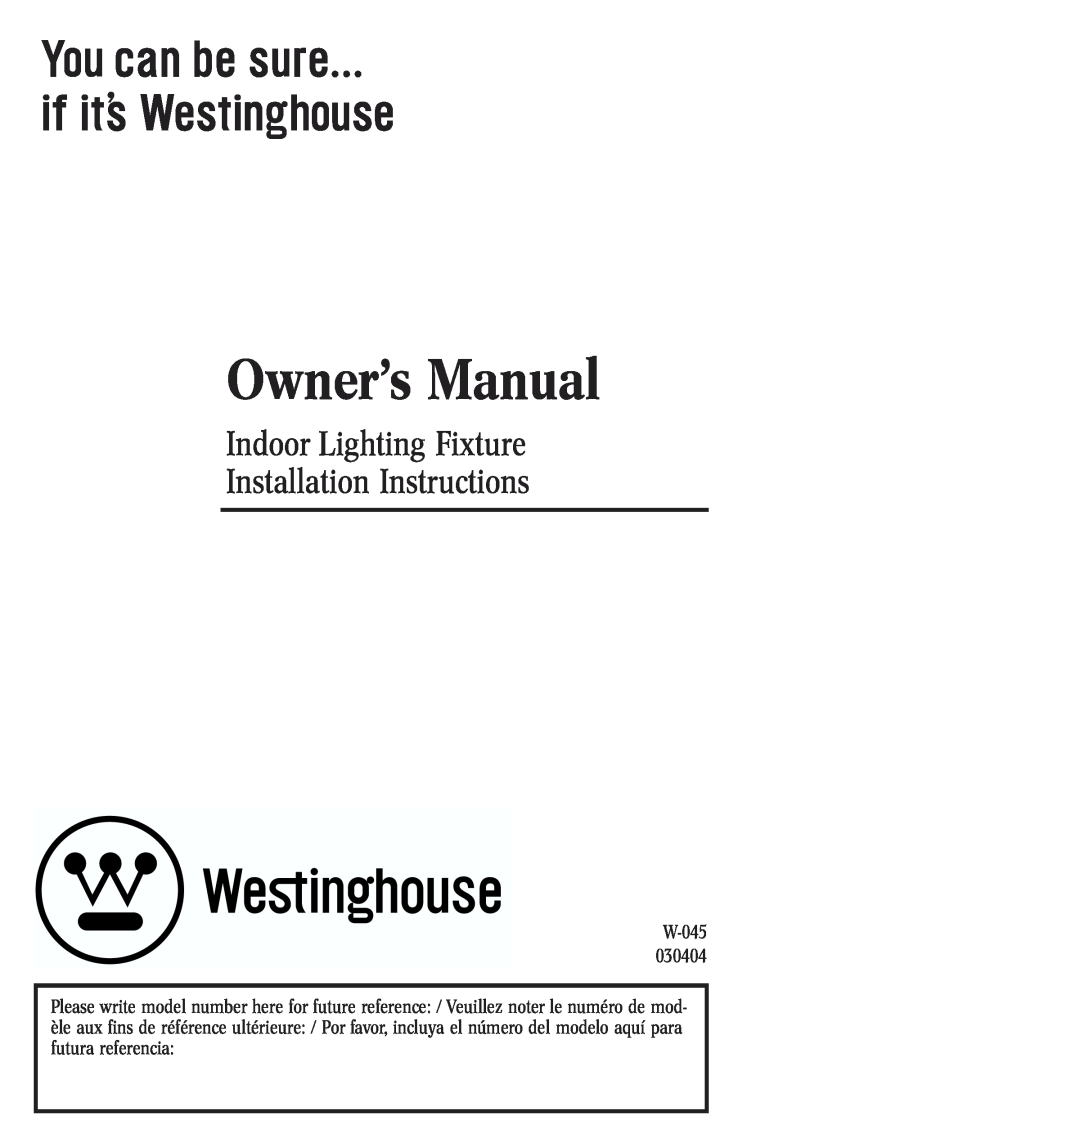 Westinghouse 30404 owner manual Indoor Lighting Fixture Installation Instructions 